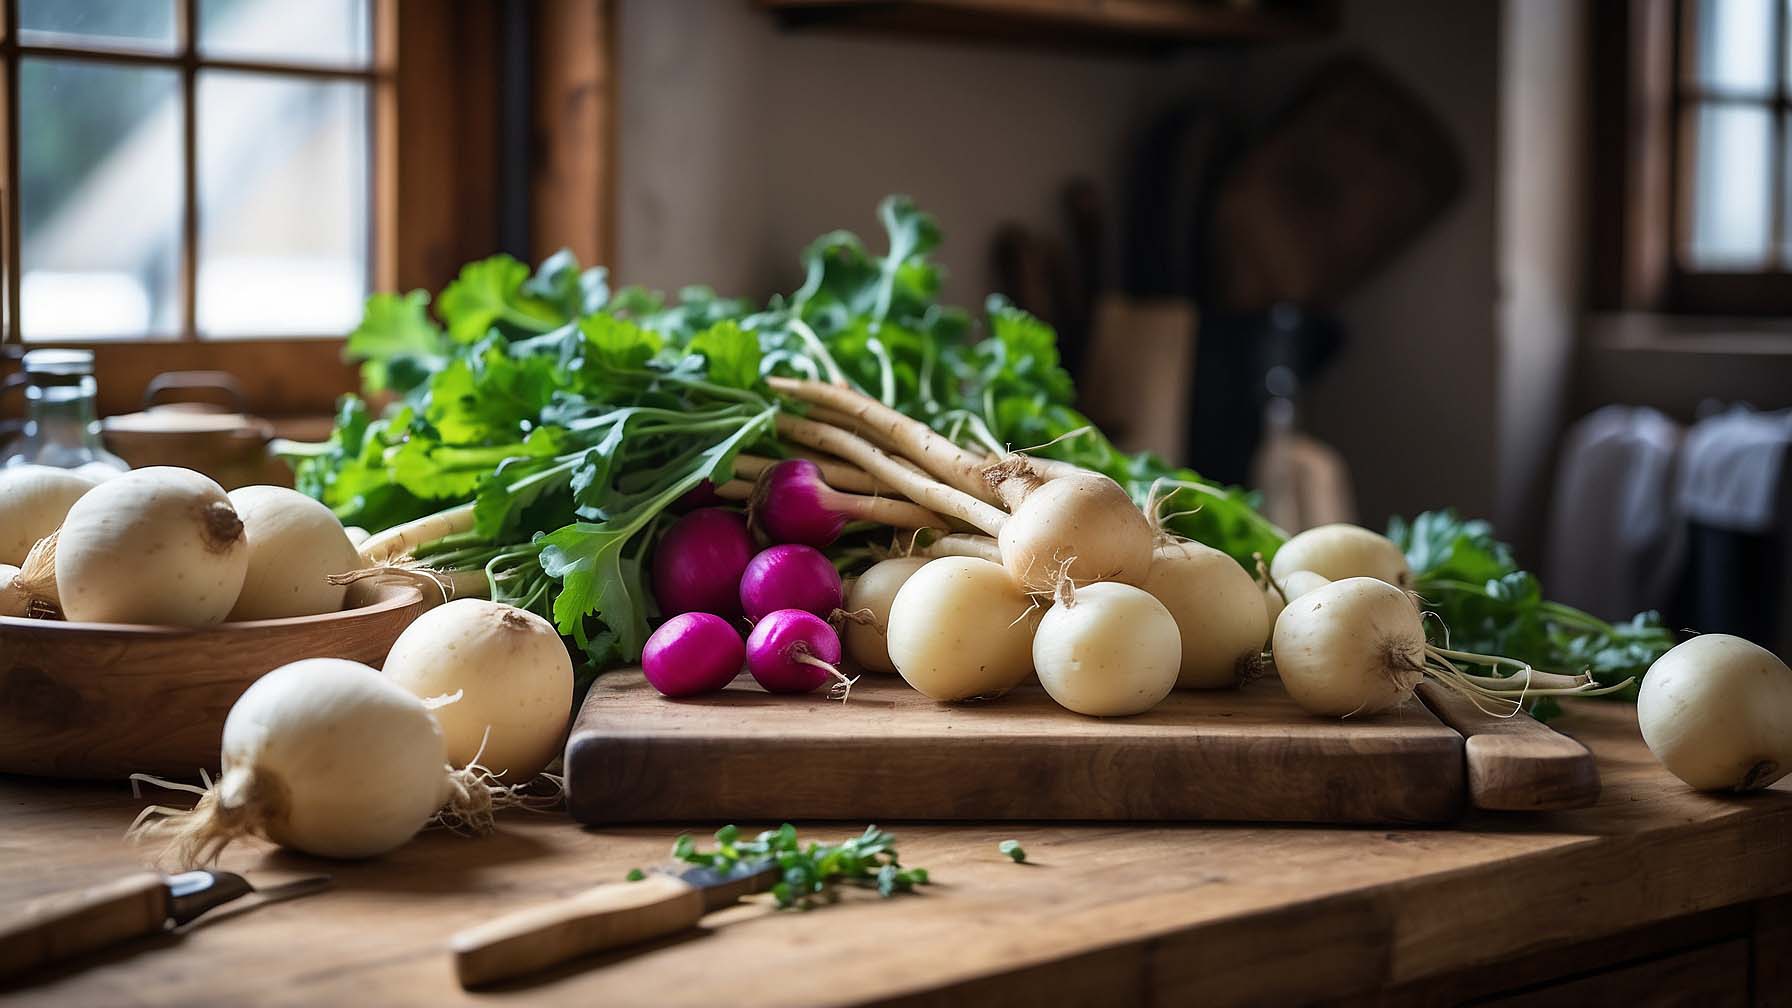 Turnips And Parsnips